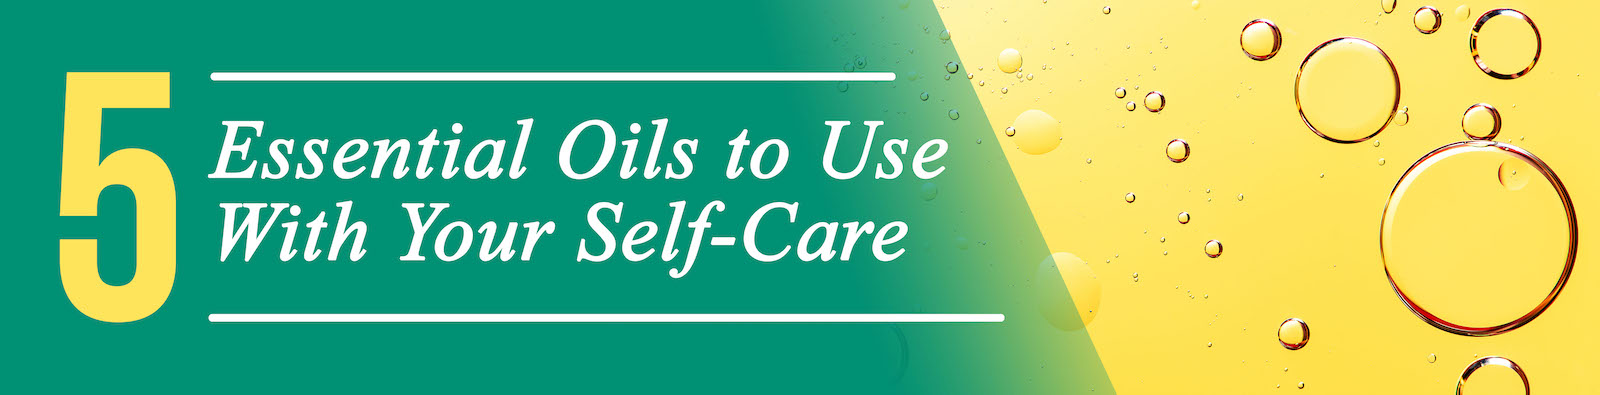 5 Essential Oils to Use with Your Self-care